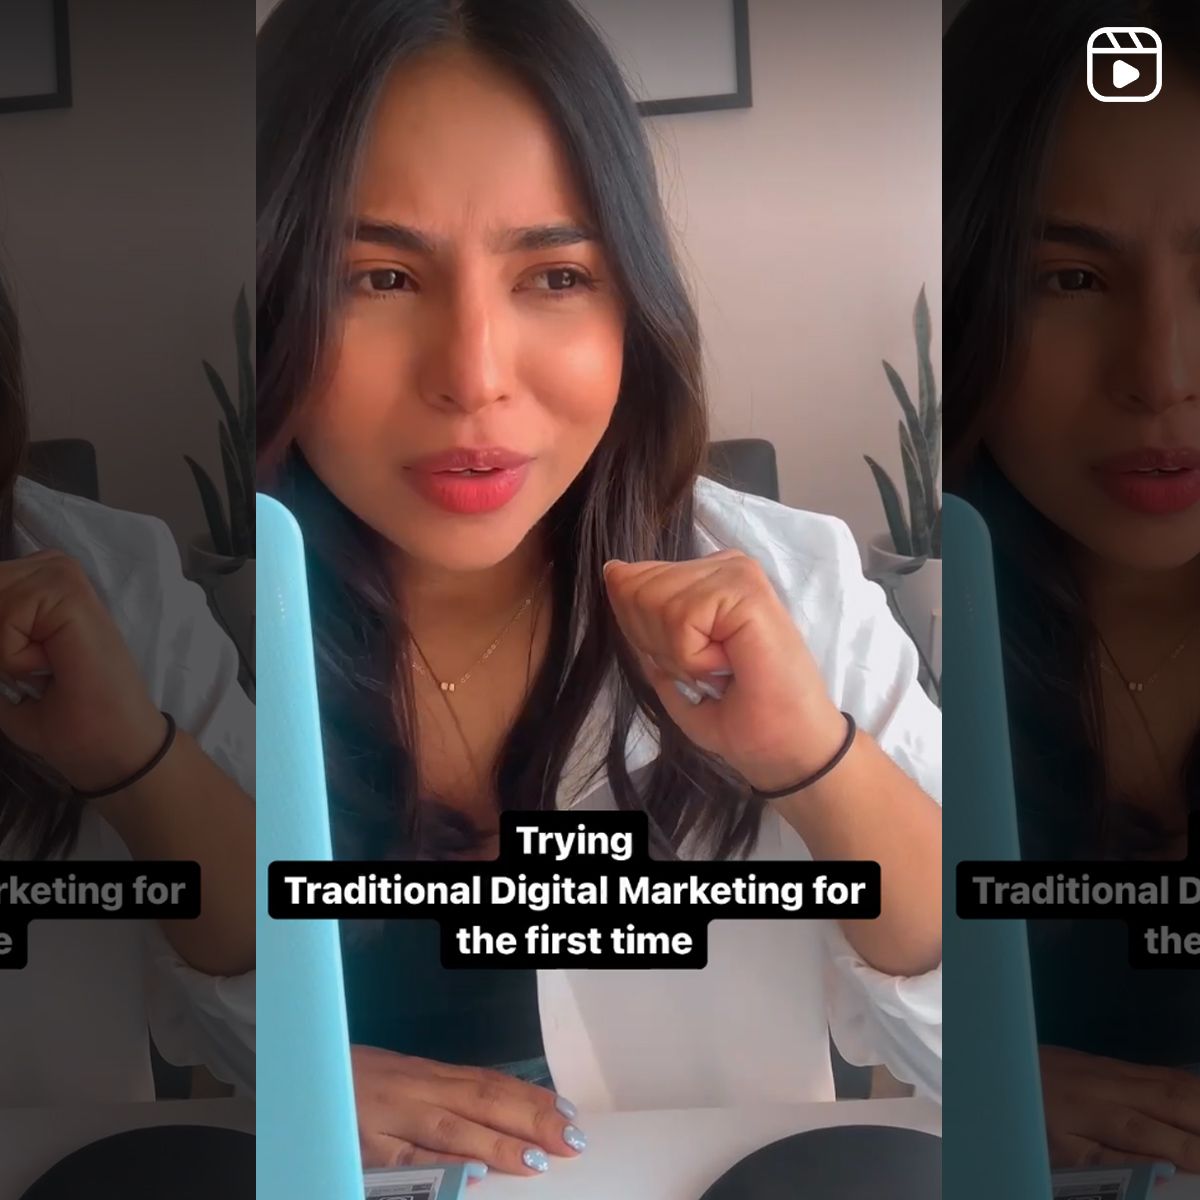 Trying Traditional Digital Marketing for the first time